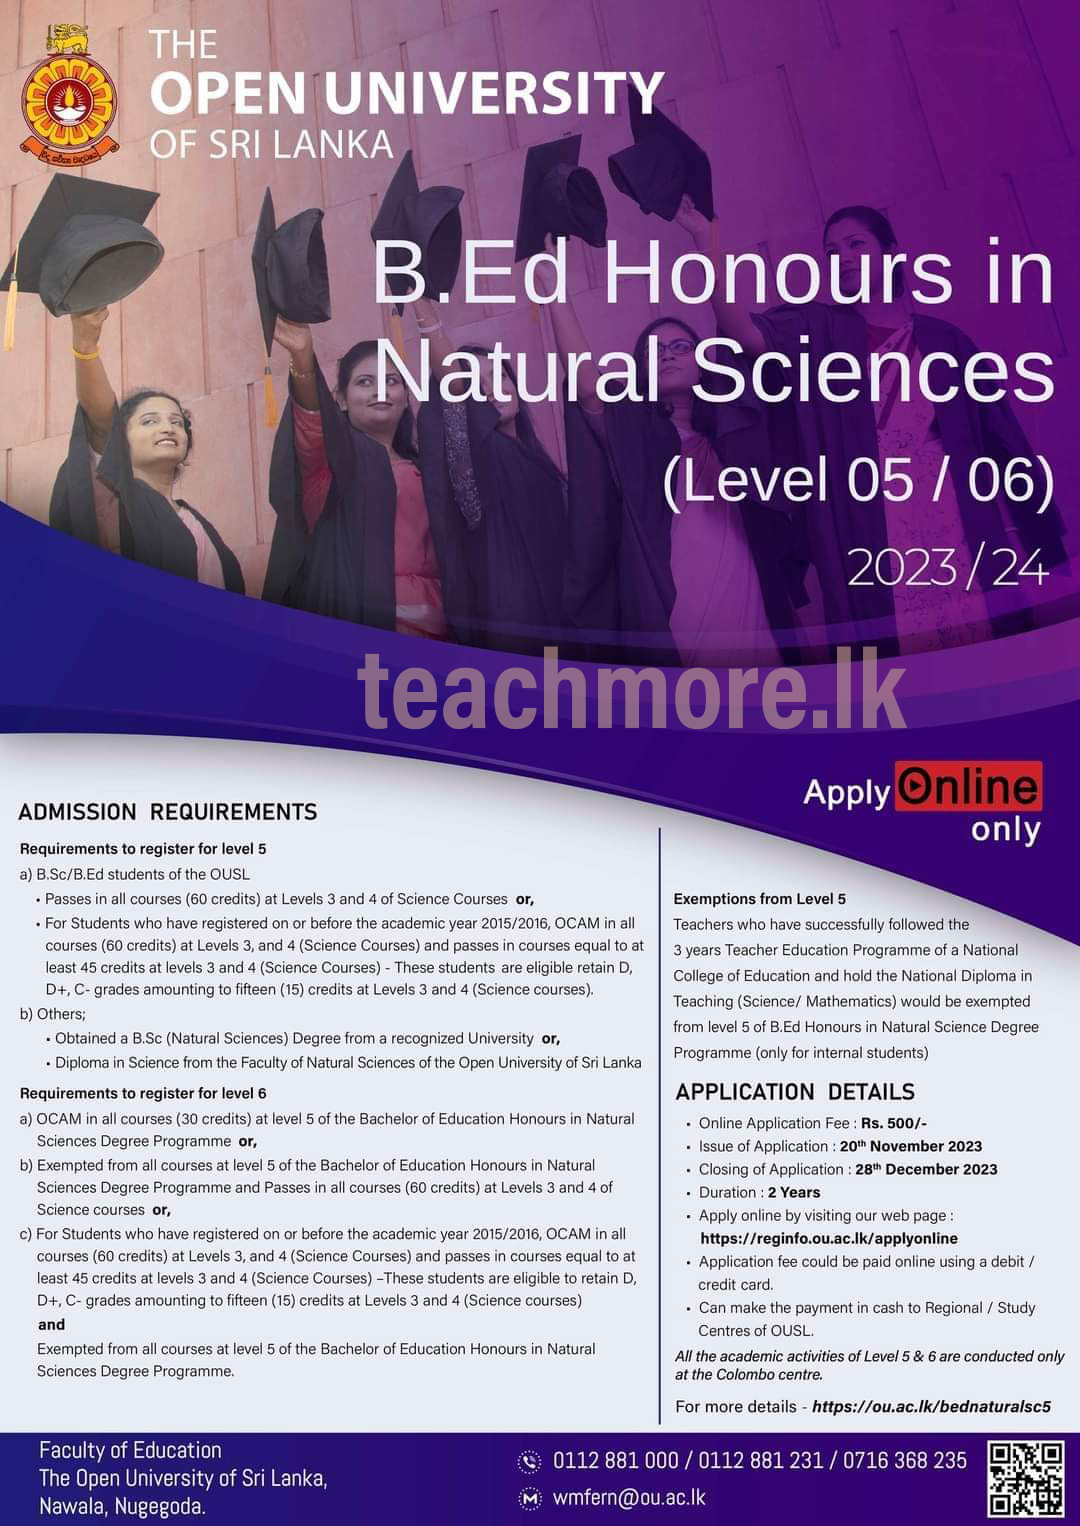 Bachelor of Education Honours in Natural Sciences Degree